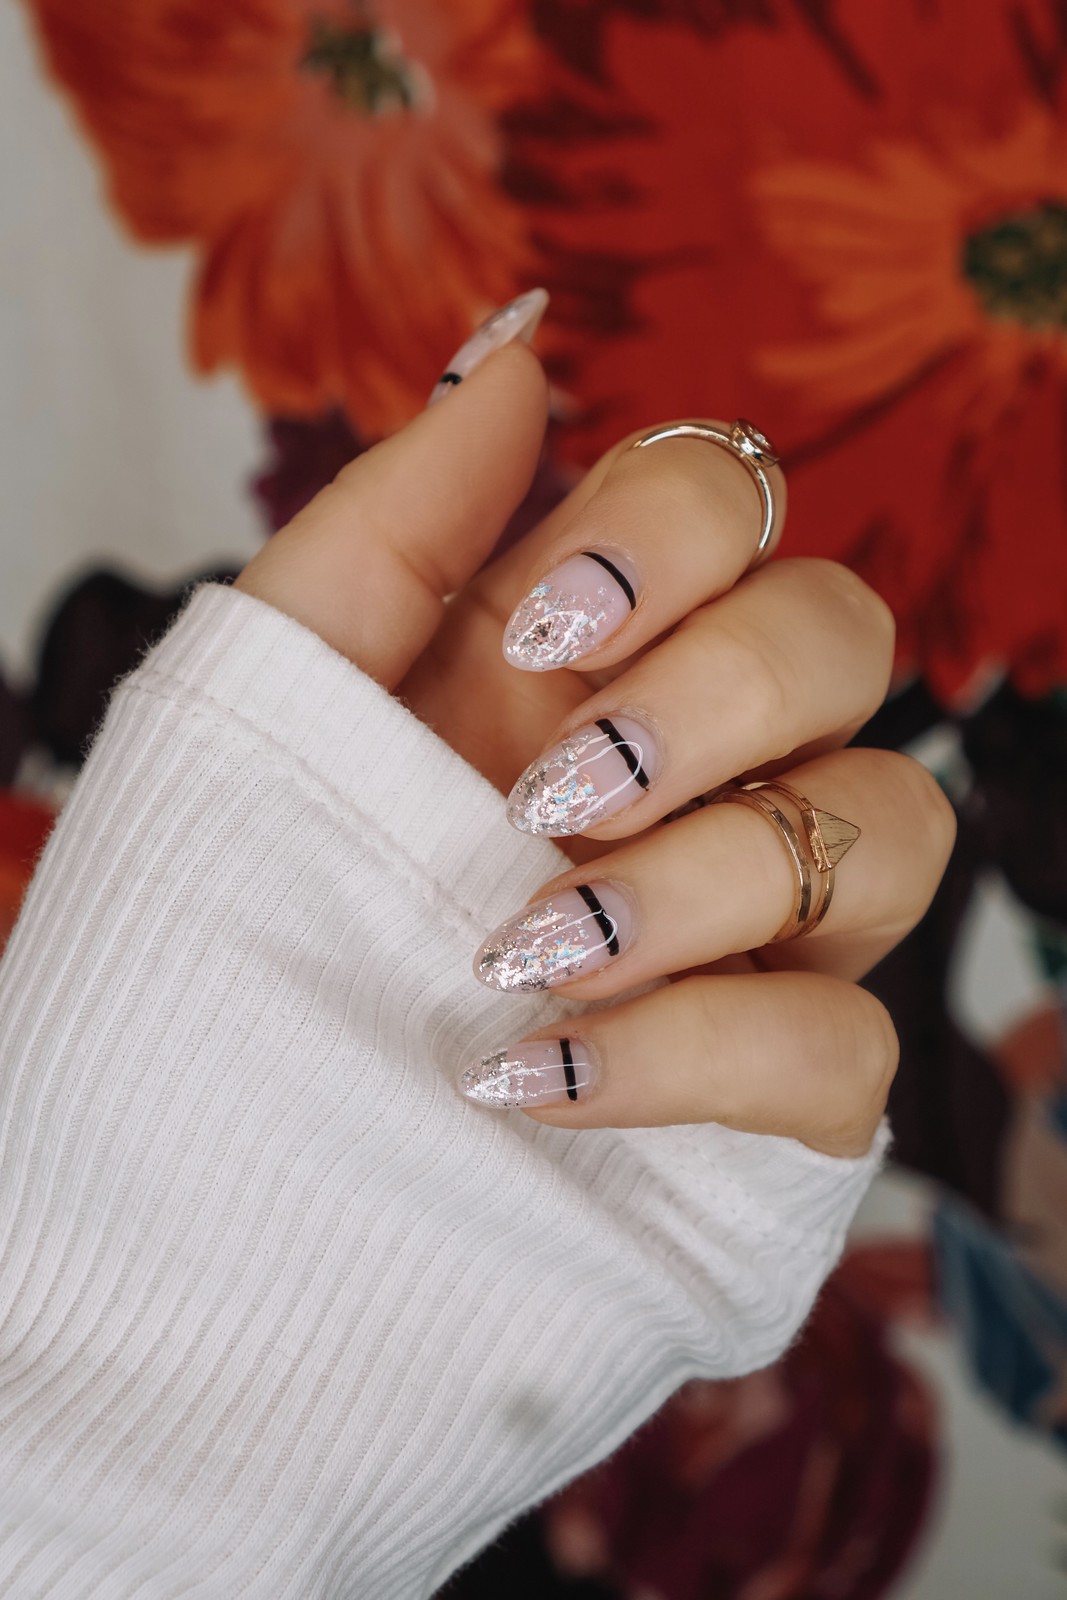 Manicure of the Month: Silver Foil Nails | New Years Eve Manicure Ideas | Edgy Nail Art | Minimal Nail Design | Fall Nails | Autumn Nails Acrylic | Silver Glitter Nails